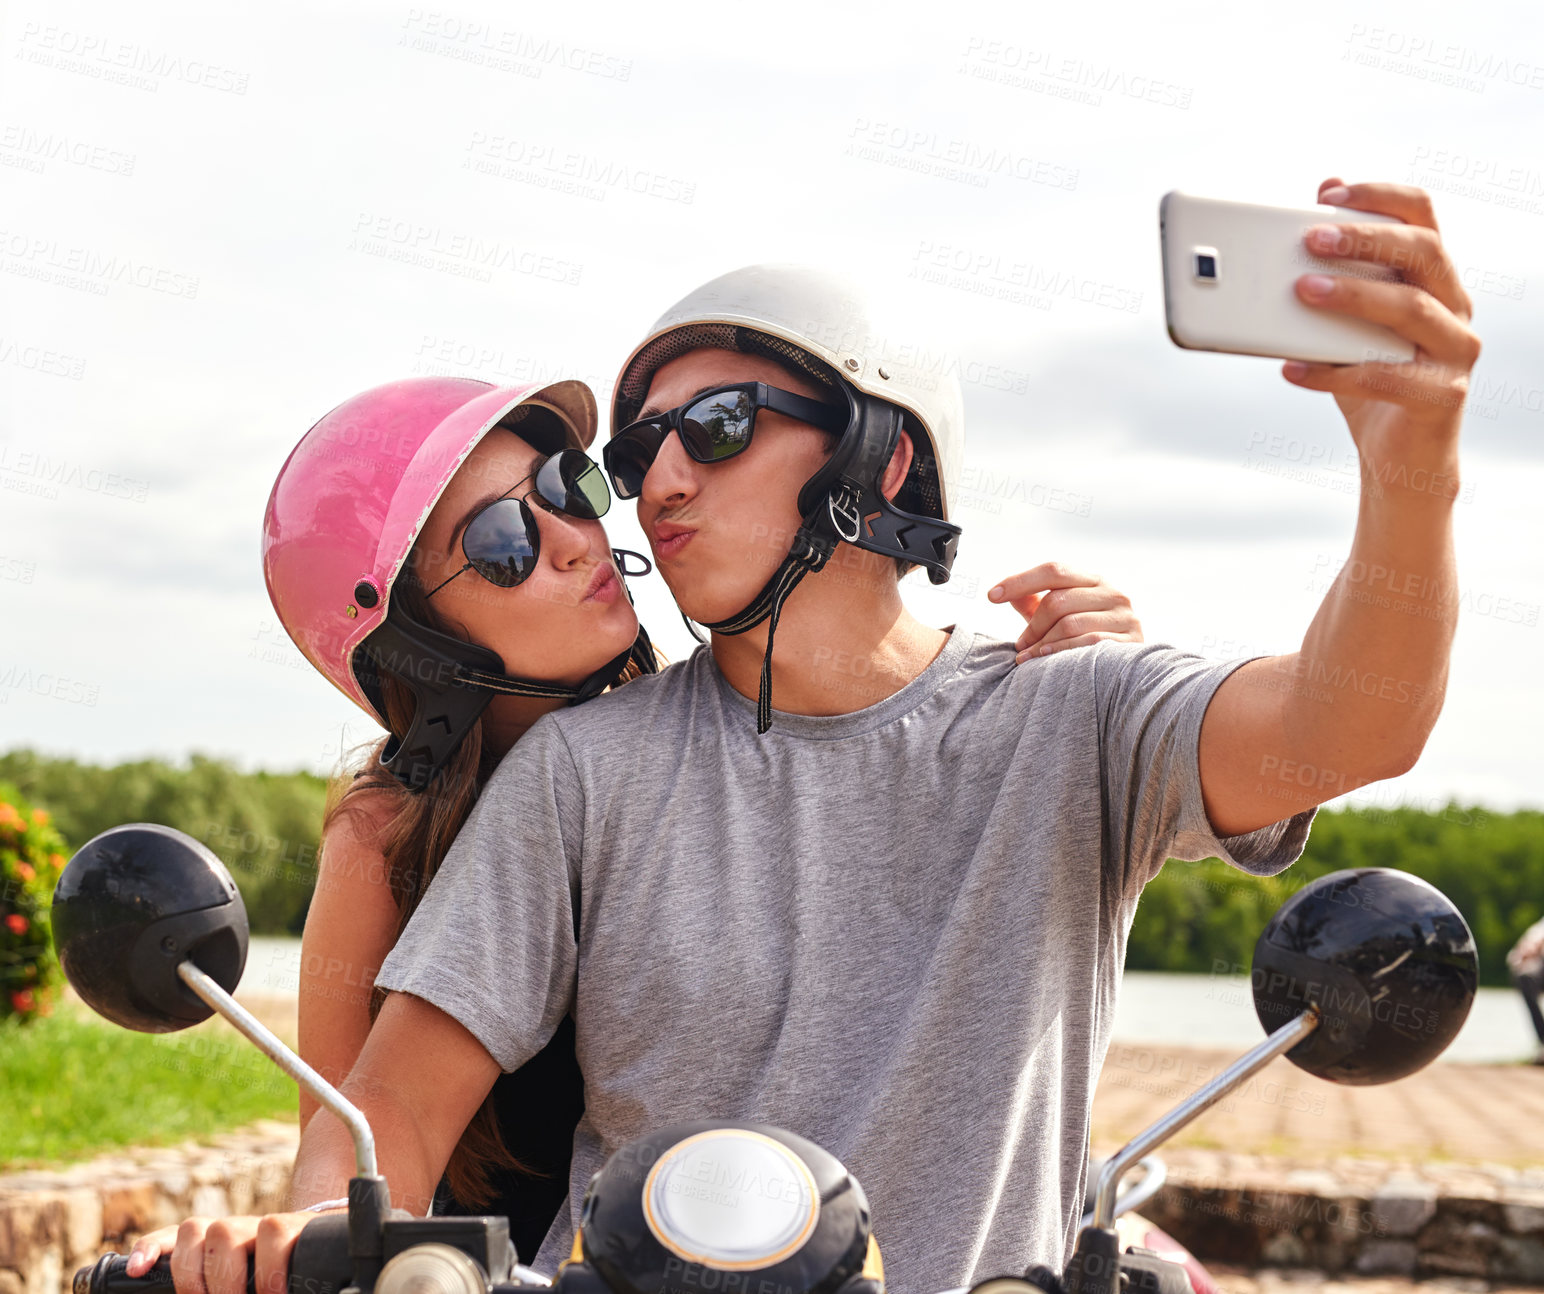 Buy stock photo Shot of a young couple taking a selfie together while out for a ride on a scooter